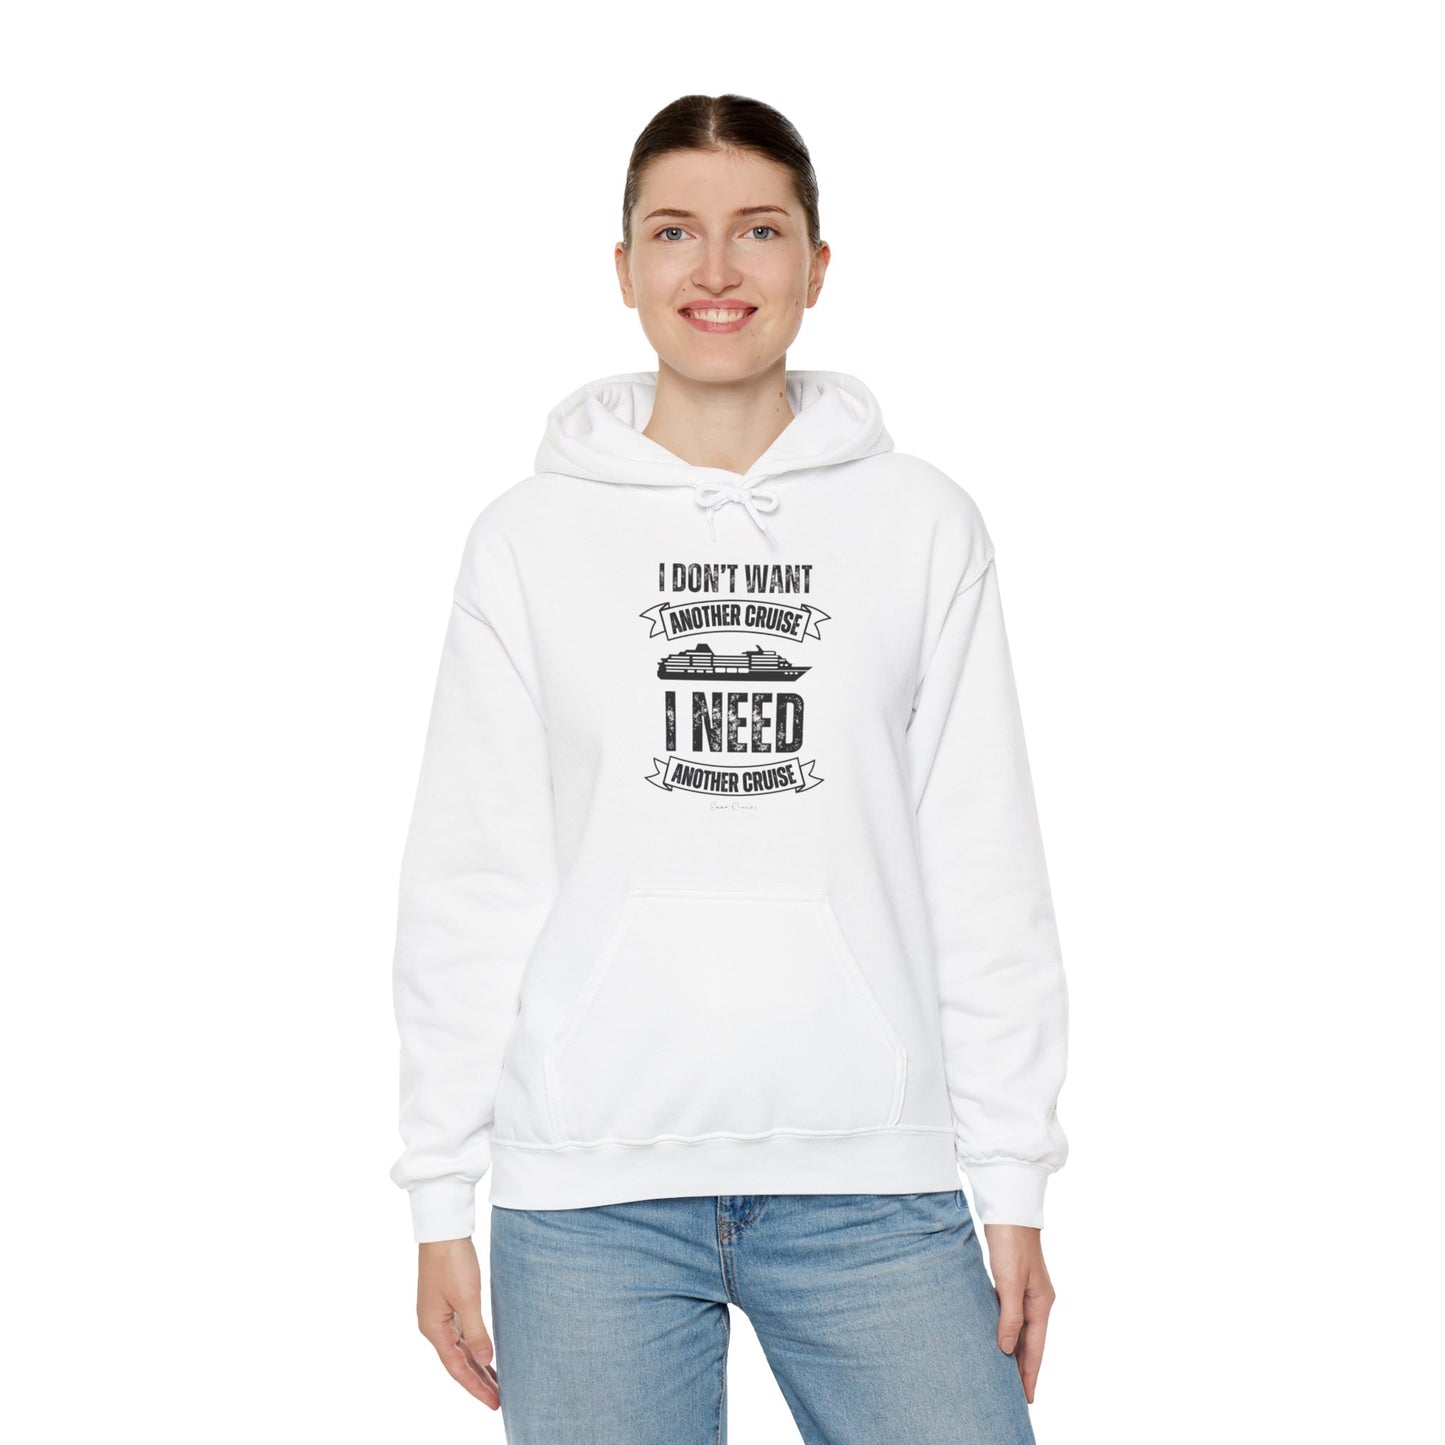 I Don't Want Another Cruise - UNISEX Hoodie